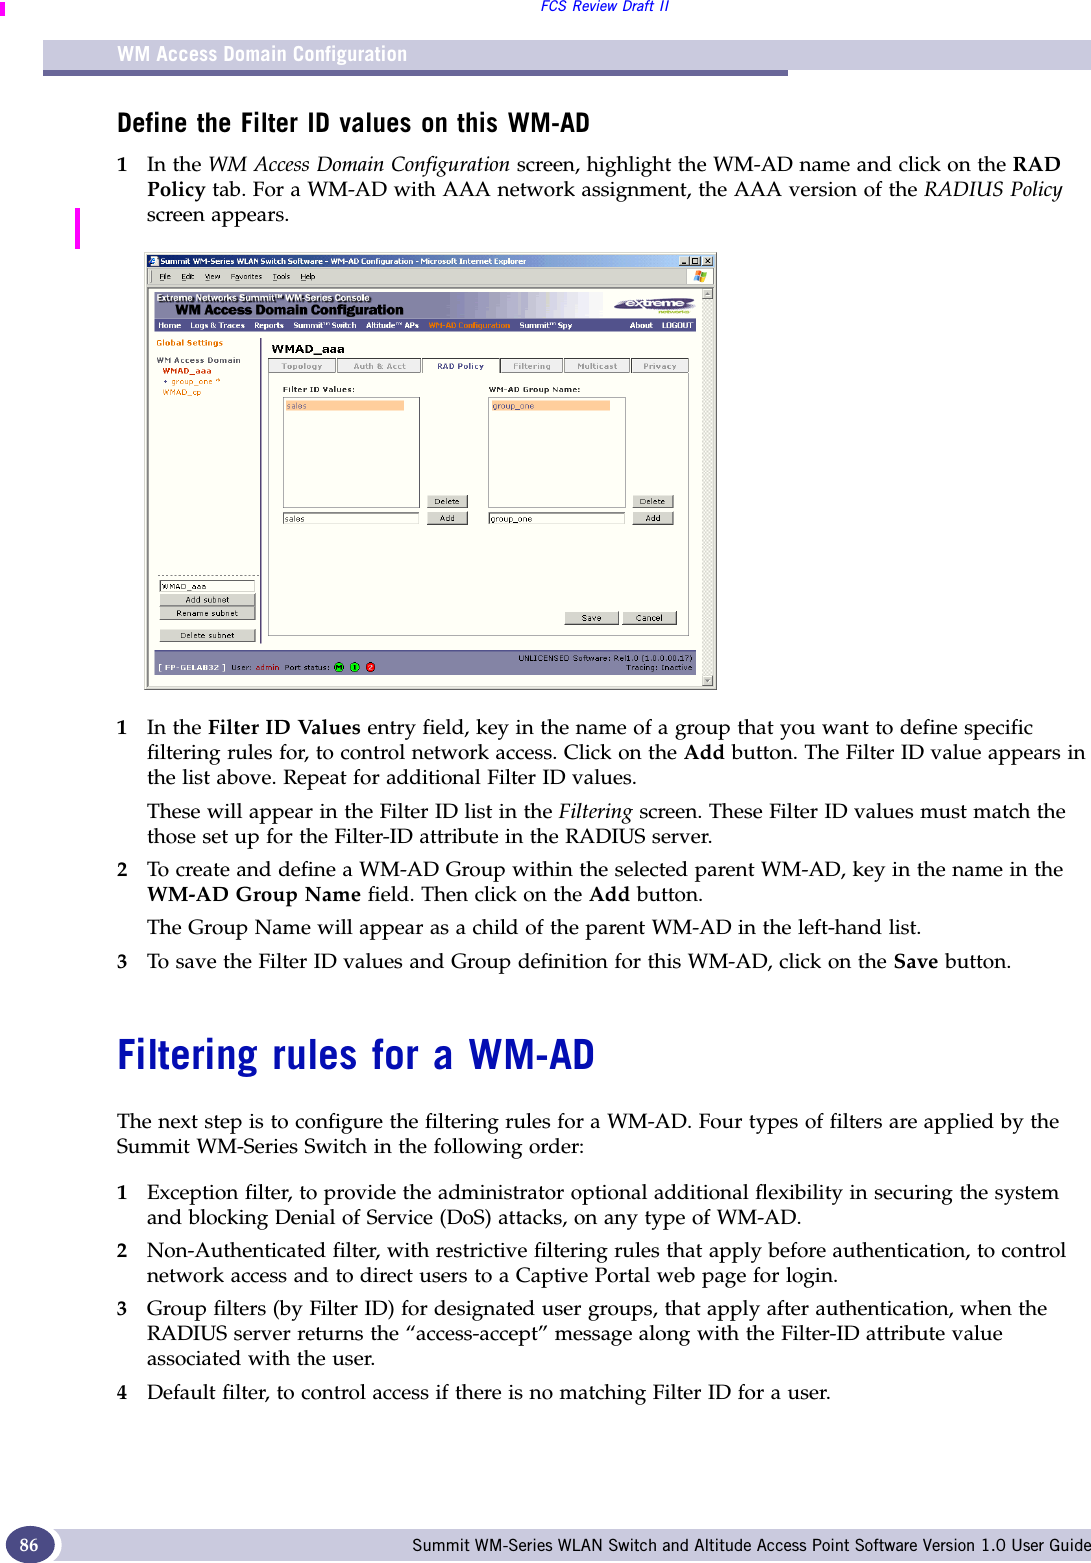 WM Access Domain ConfigurationFCS Review Draft IISummit WM-Series WLAN Switch and Altitude Access Point Software Version 1.0 User Guide86Define the Filter ID values on this WM-AD1In the WM Access Domain Configuration screen, highlight the WM-AD name and click on the RAD Policy tab. For a WM-AD with AAA network assignment, the AAA version of the RADIUS Policy screen appears.1In the Filter ID Values entry field, key in the name of a group that you want to define specific filtering rules for, to control network access. Click on the Add button. The Filter ID value appears in the list above. Repeat for additional Filter ID values.These will appear in the Filter ID list in the Filtering screen. These Filter ID values must match the those set up for the Filter-ID attribute in the RADIUS server.2To create and define a WM-AD Group within the selected parent WM-AD, key in the name in the WM-AD Group Name field. Then click on the Add button.The Group Name will appear as a child of the parent WM-AD in the left-hand list.3To save the Filter ID values and Group definition for this WM-AD, click on the Save button.Filtering rules for a WM-ADThe next step is to configure the filtering rules for a WM-AD. Four types of filters are applied by the Summit WM-Series Switch in the following order:1Exception filter, to provide the administrator optional additional flexibility in securing the system and blocking Denial of Service (DoS) attacks, on any type of WM-AD.2Non-Authenticated filter, with restrictive filtering rules that apply before authentication, to control network access and to direct users to a Captive Portal web page for login.3Group filters (by Filter ID) for designated user groups, that apply after authentication, when the RADIUS server returns the “access-accept” message along with the Filter-ID attribute value associated with the user.4Default filter, to control access if there is no matching Filter ID for a user.